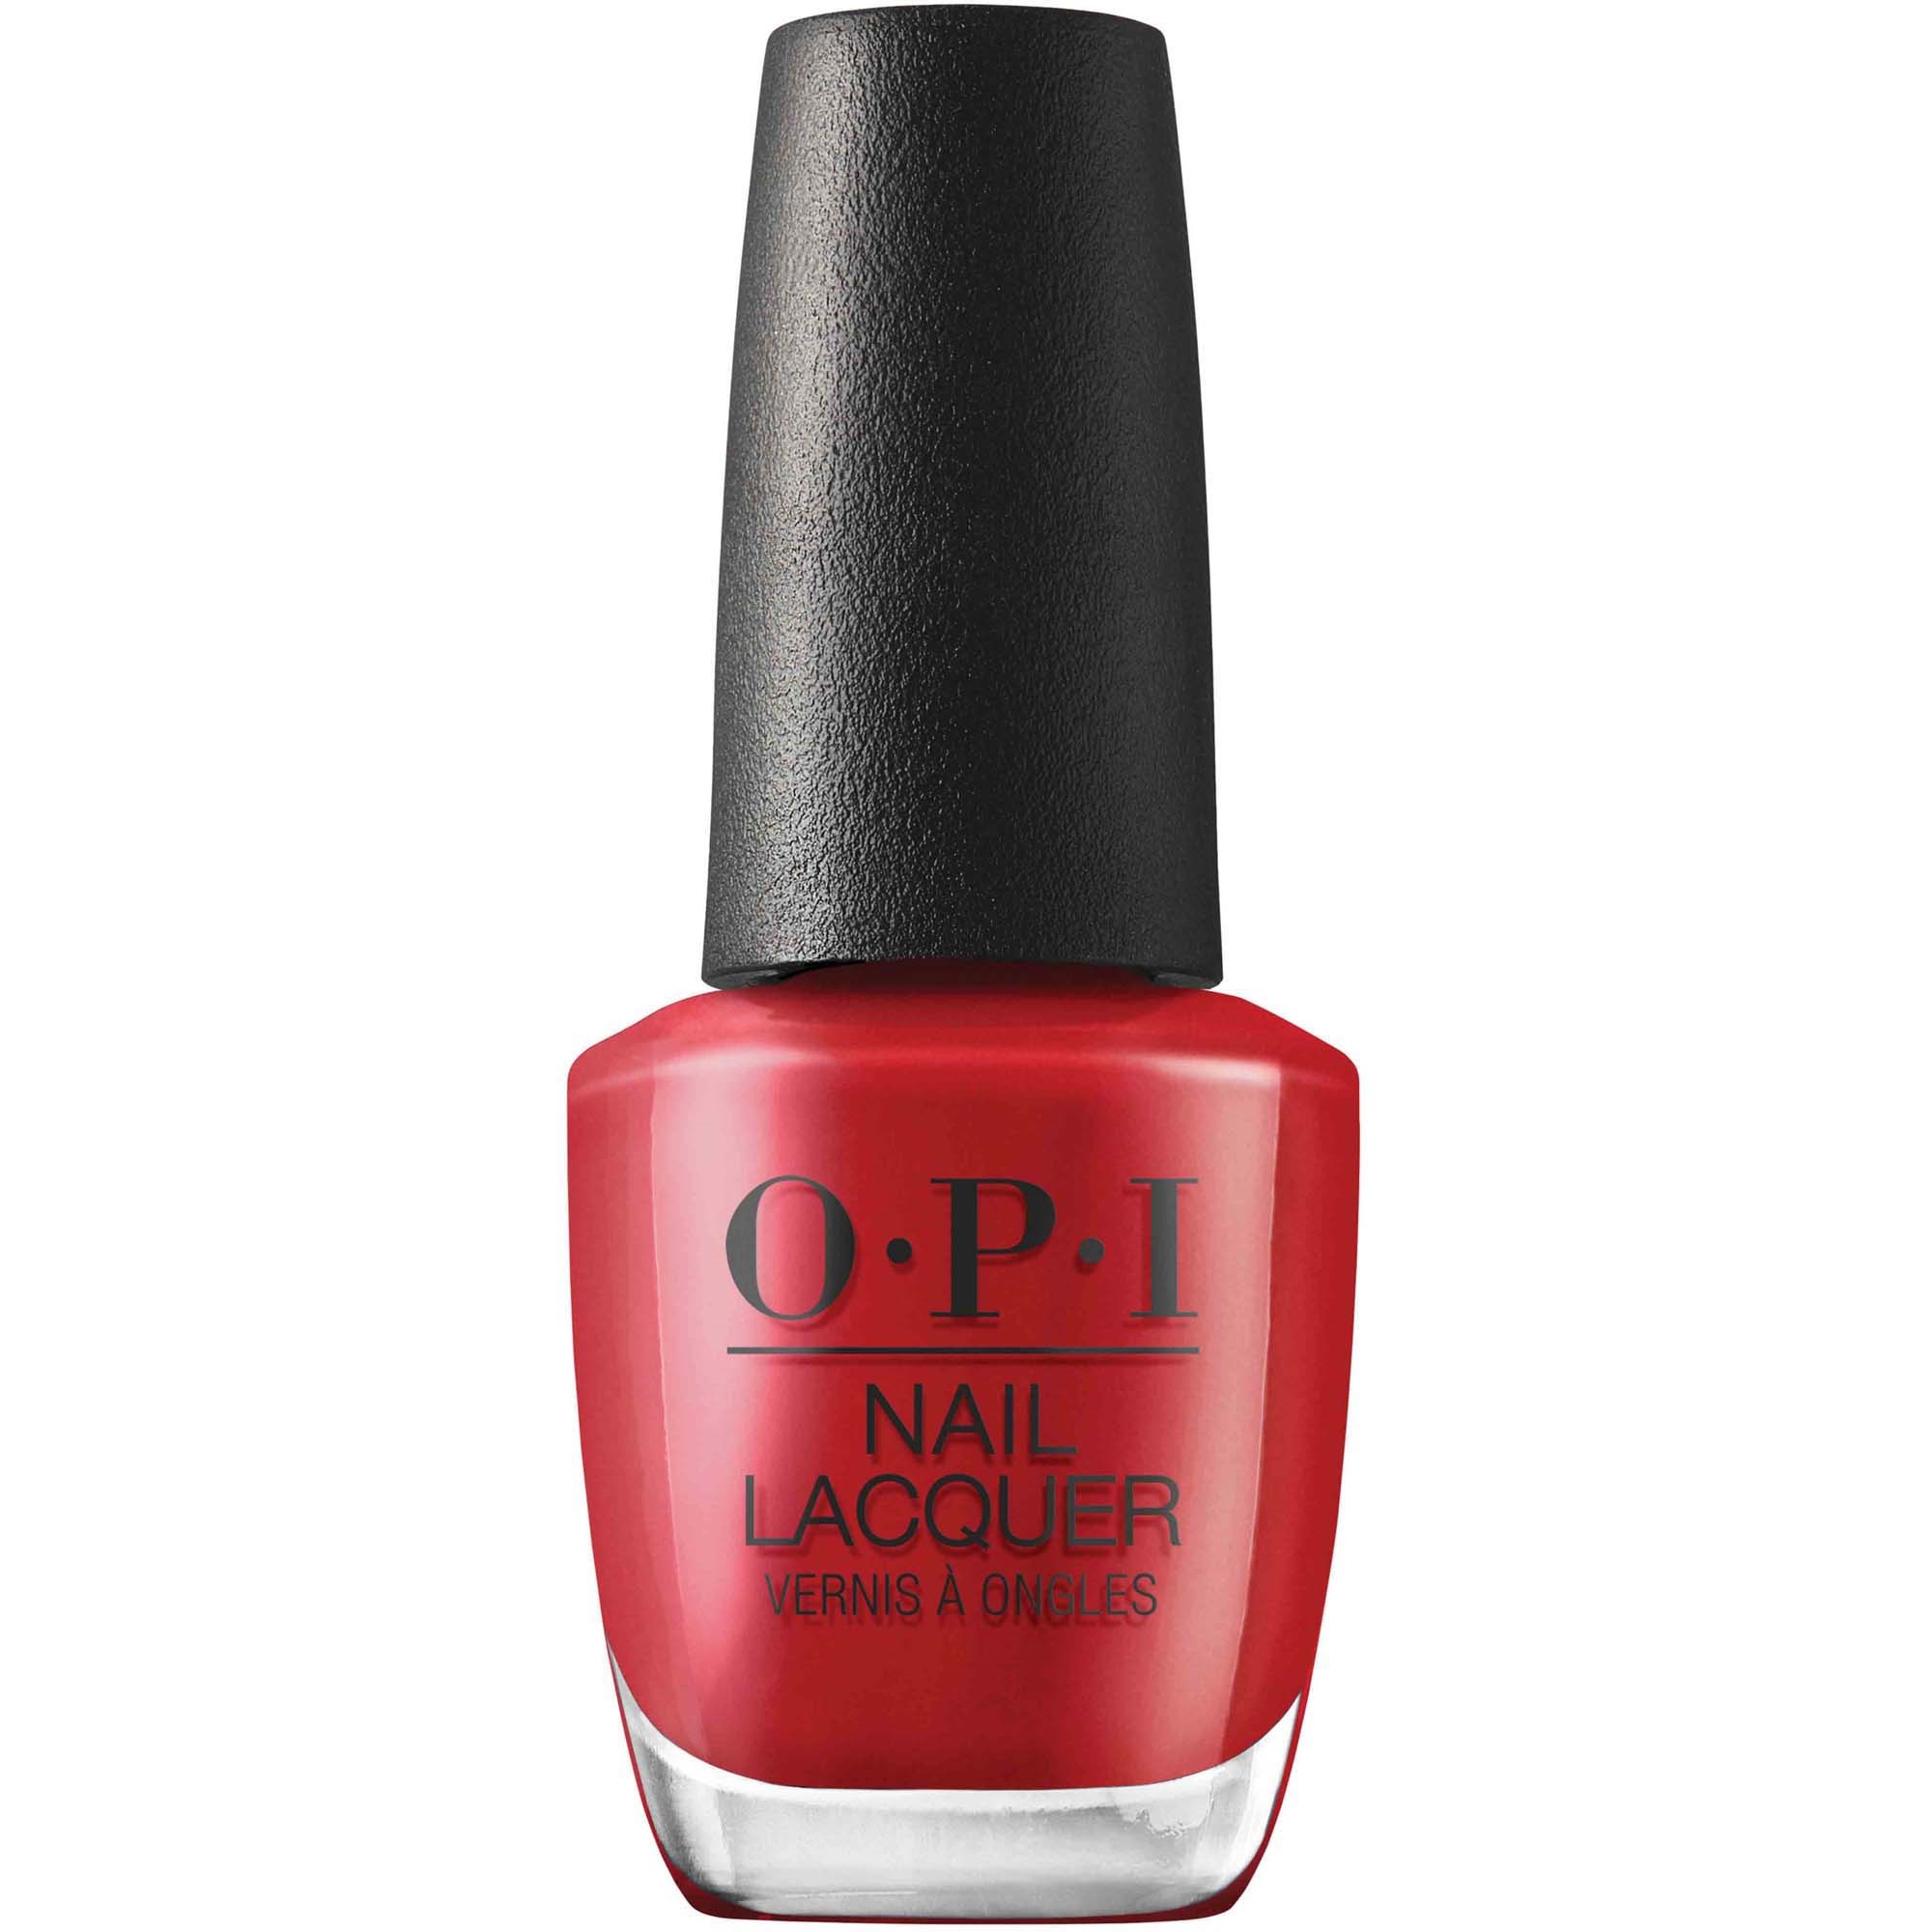 Bilde av Opi Nail Lacquer Naughty & Nice Rebel With A Clause